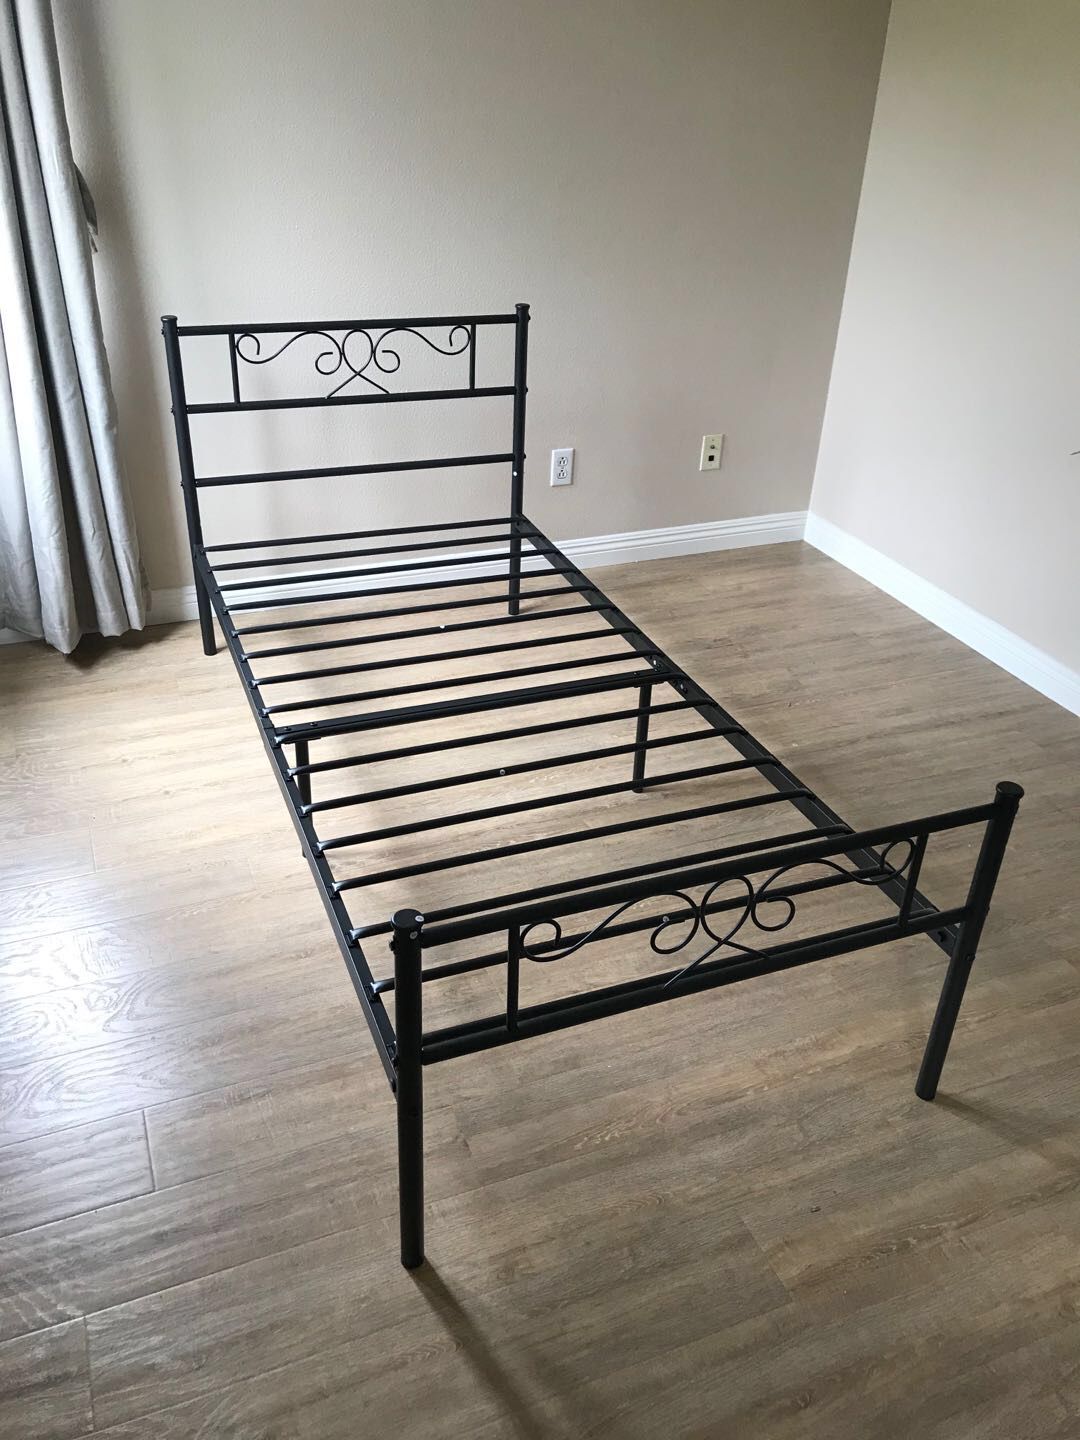 bed twin metal brand new. 65$